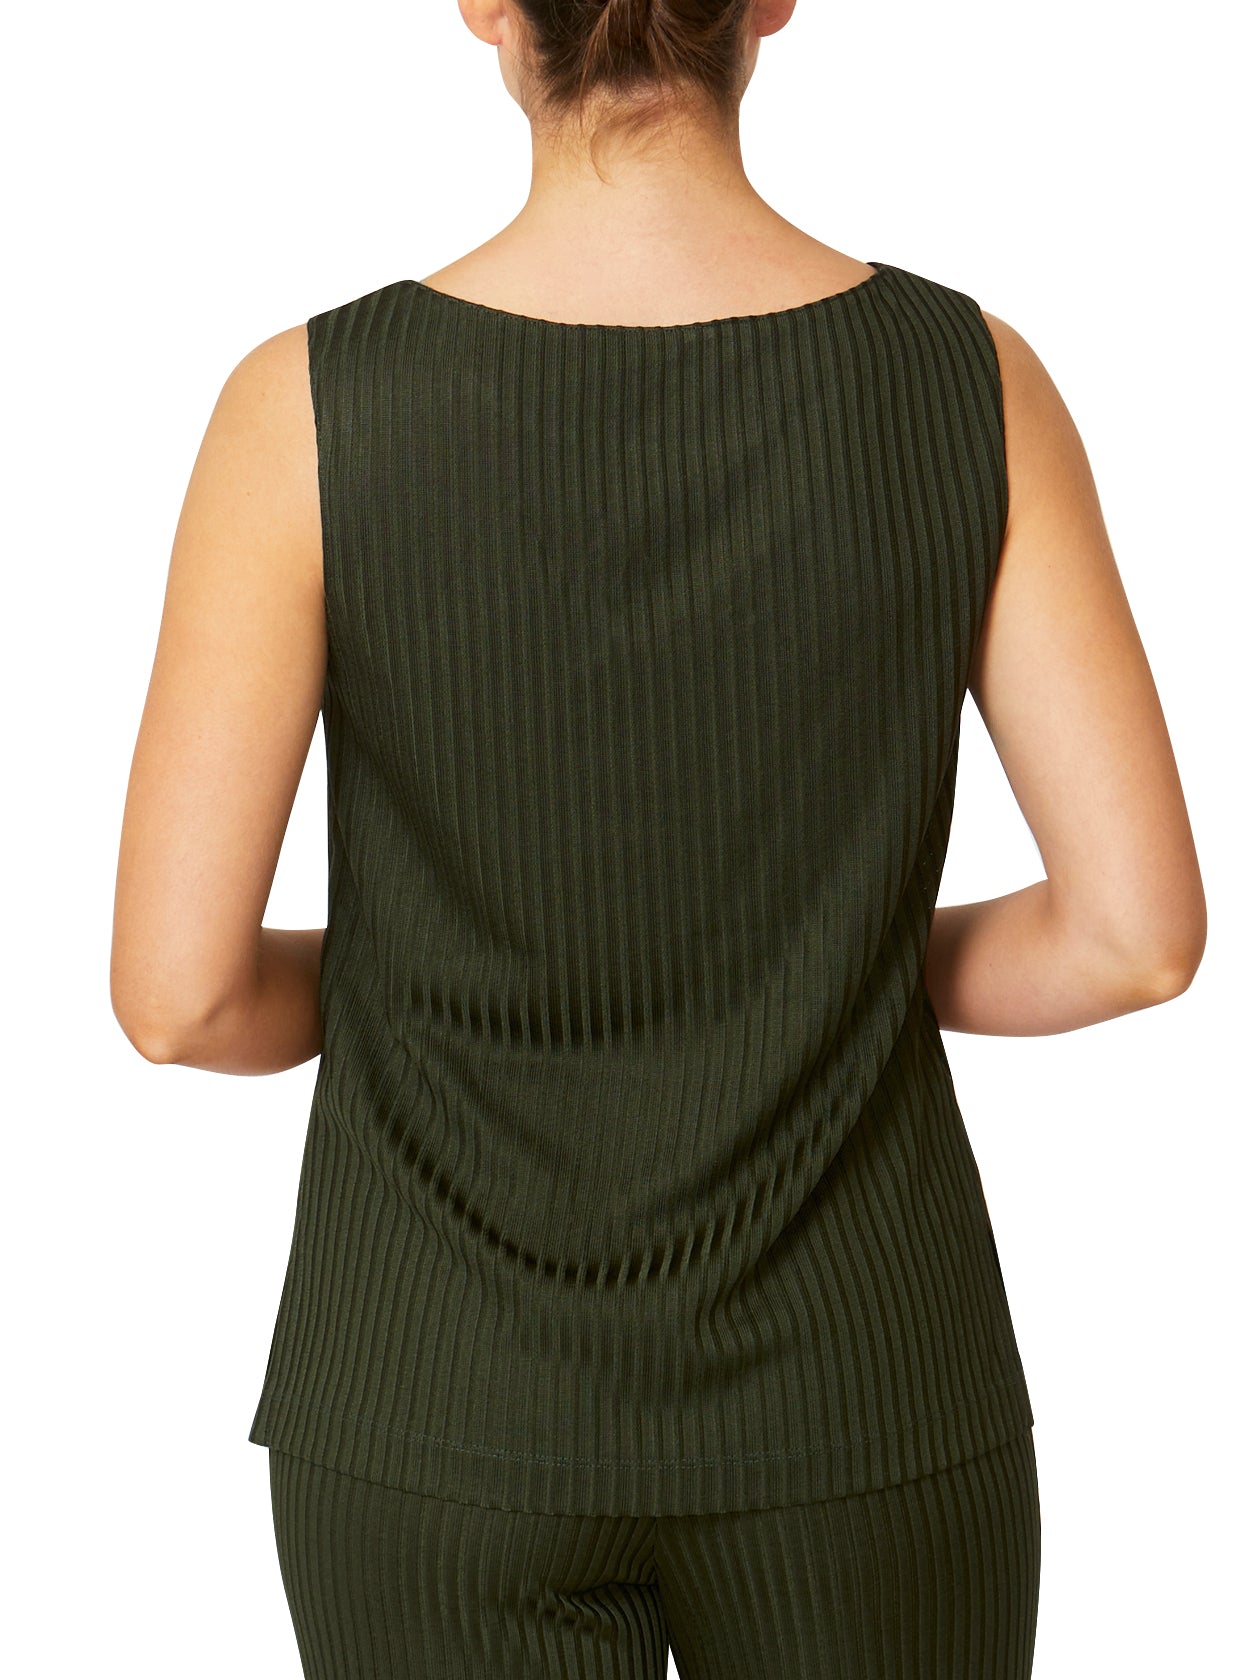 Women's Ribbed Cami in Green